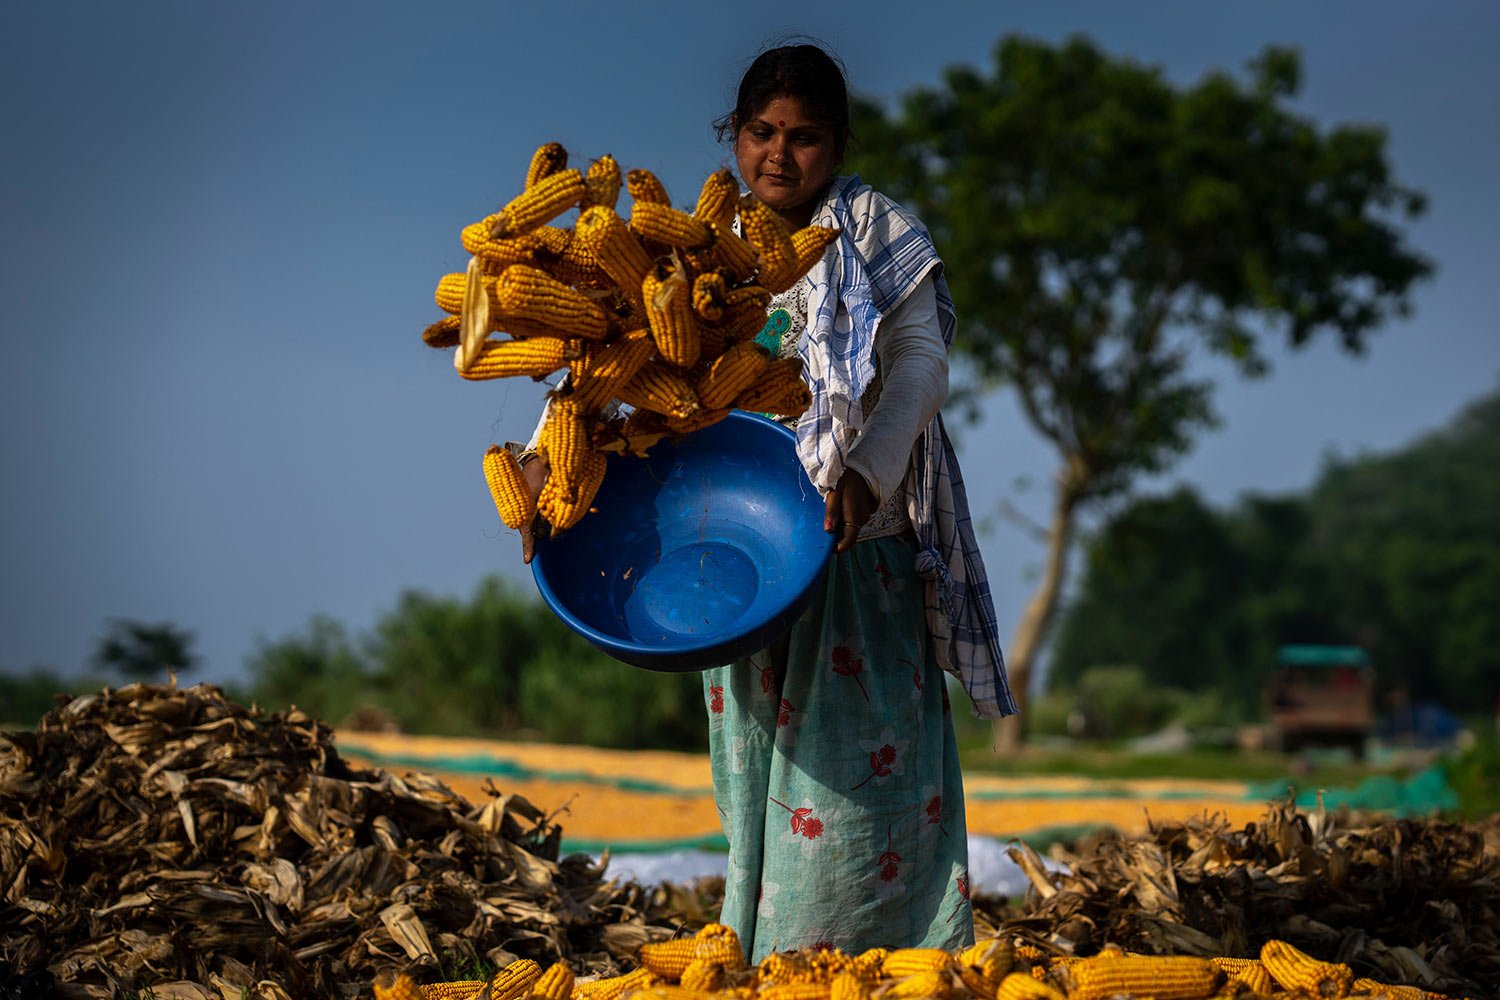  A farmer puts maize to dry in a paddy field on the outskirts of Gauhati, India, Monday, May 23, 2022. (AP Photo/Anupam Nath) 